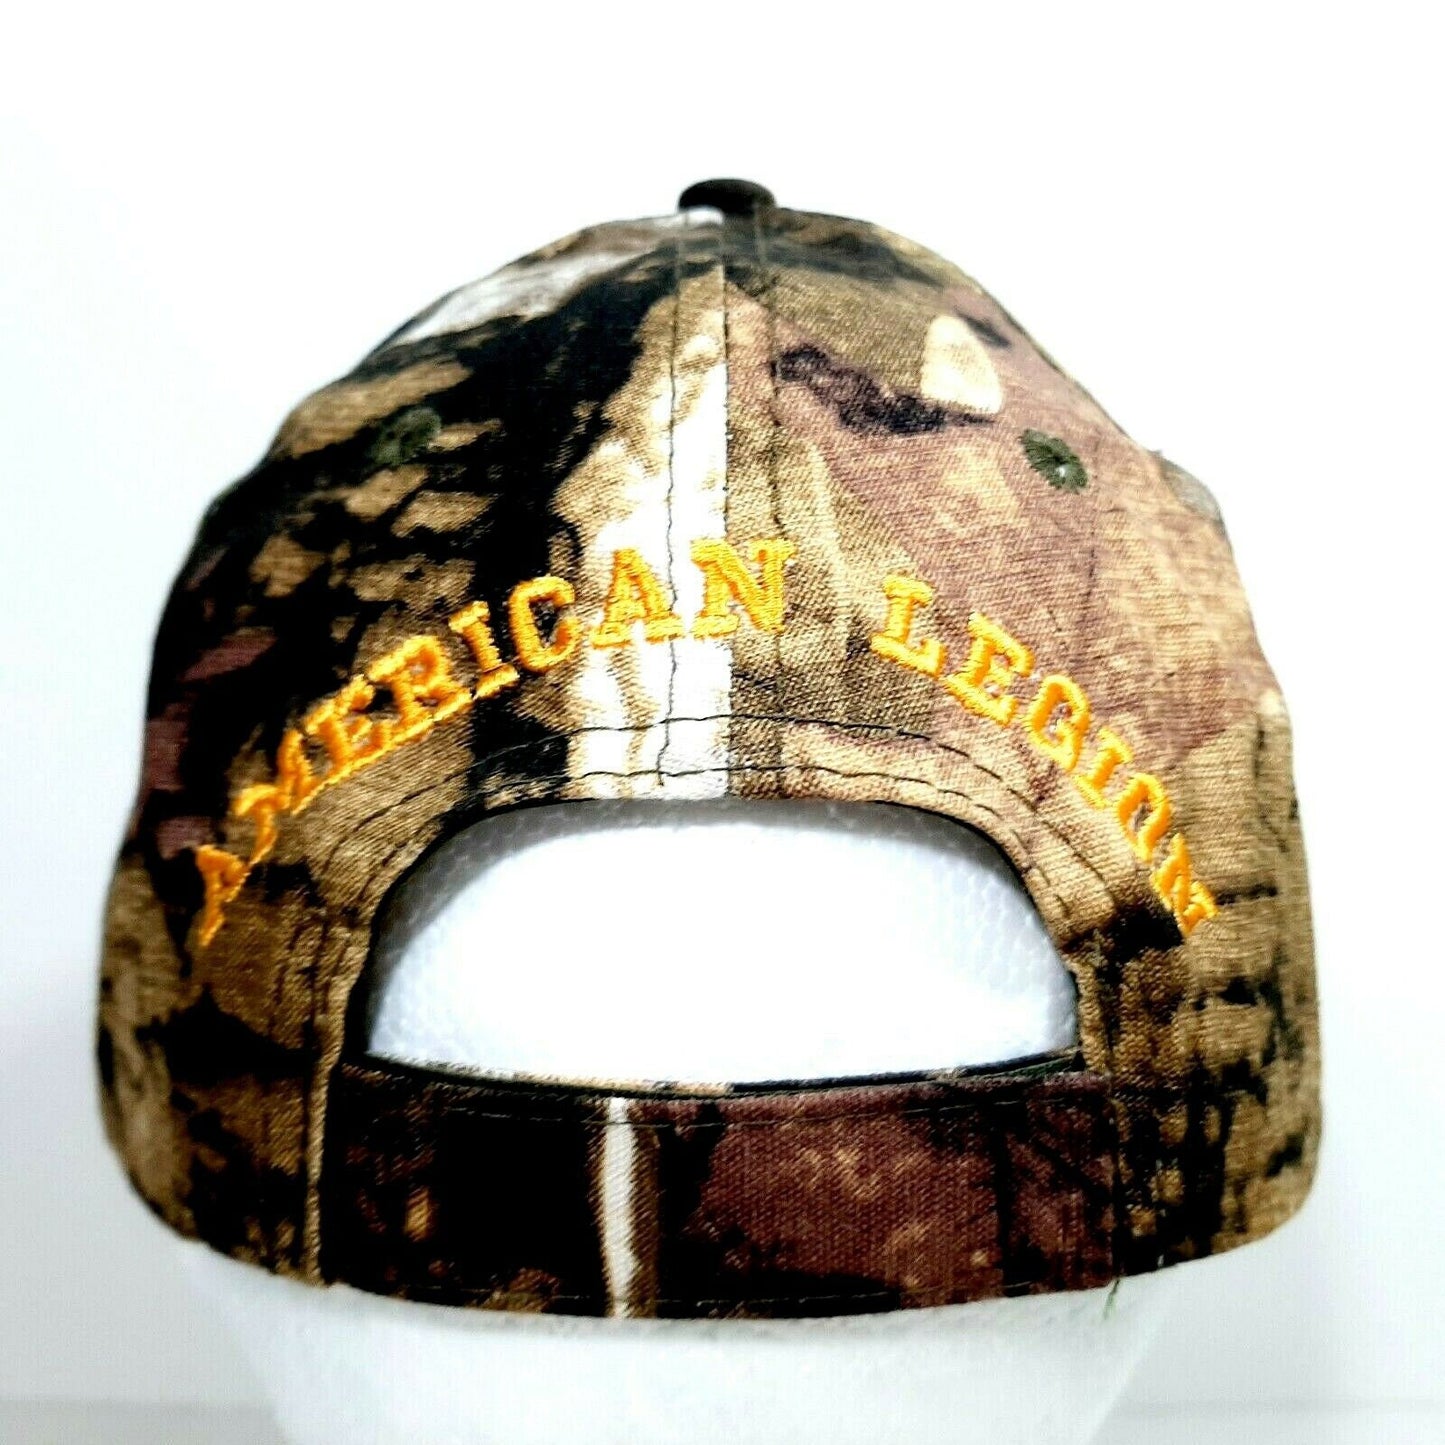 American Legion Mens Camouflage Hat Cap Embroidered Strapback